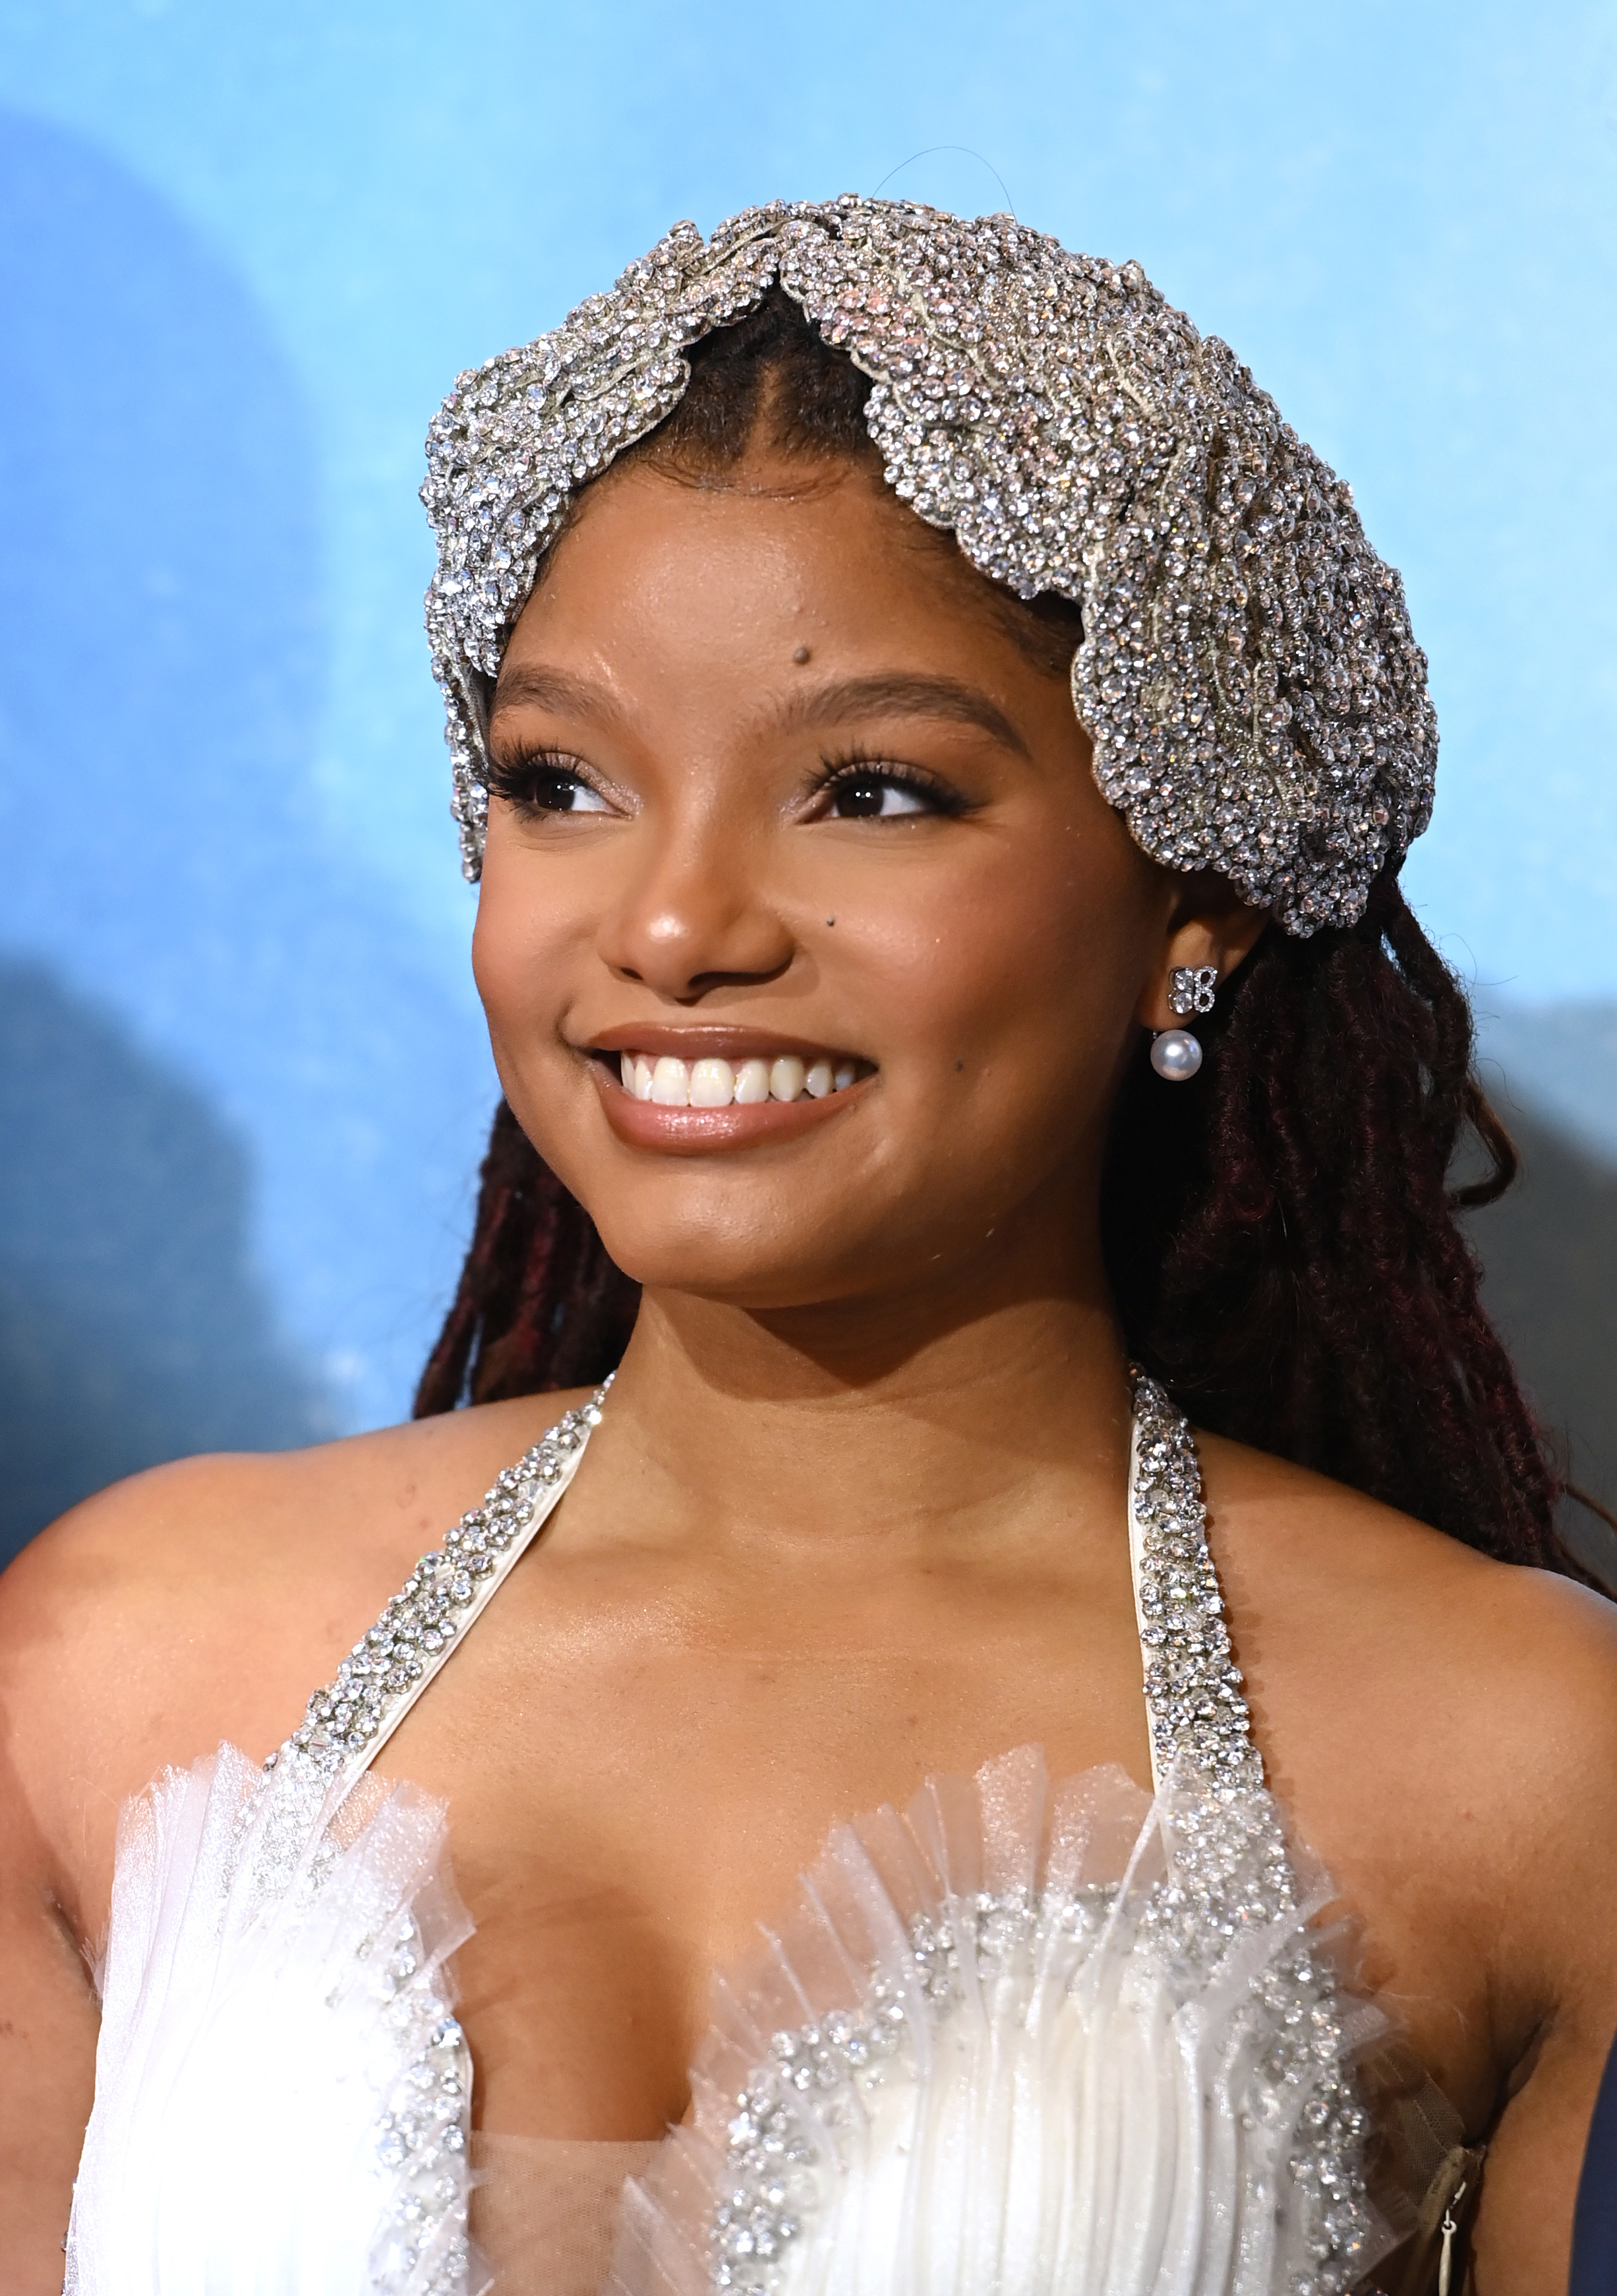 A close-up of Halle smiling in a beaded hat at a media event